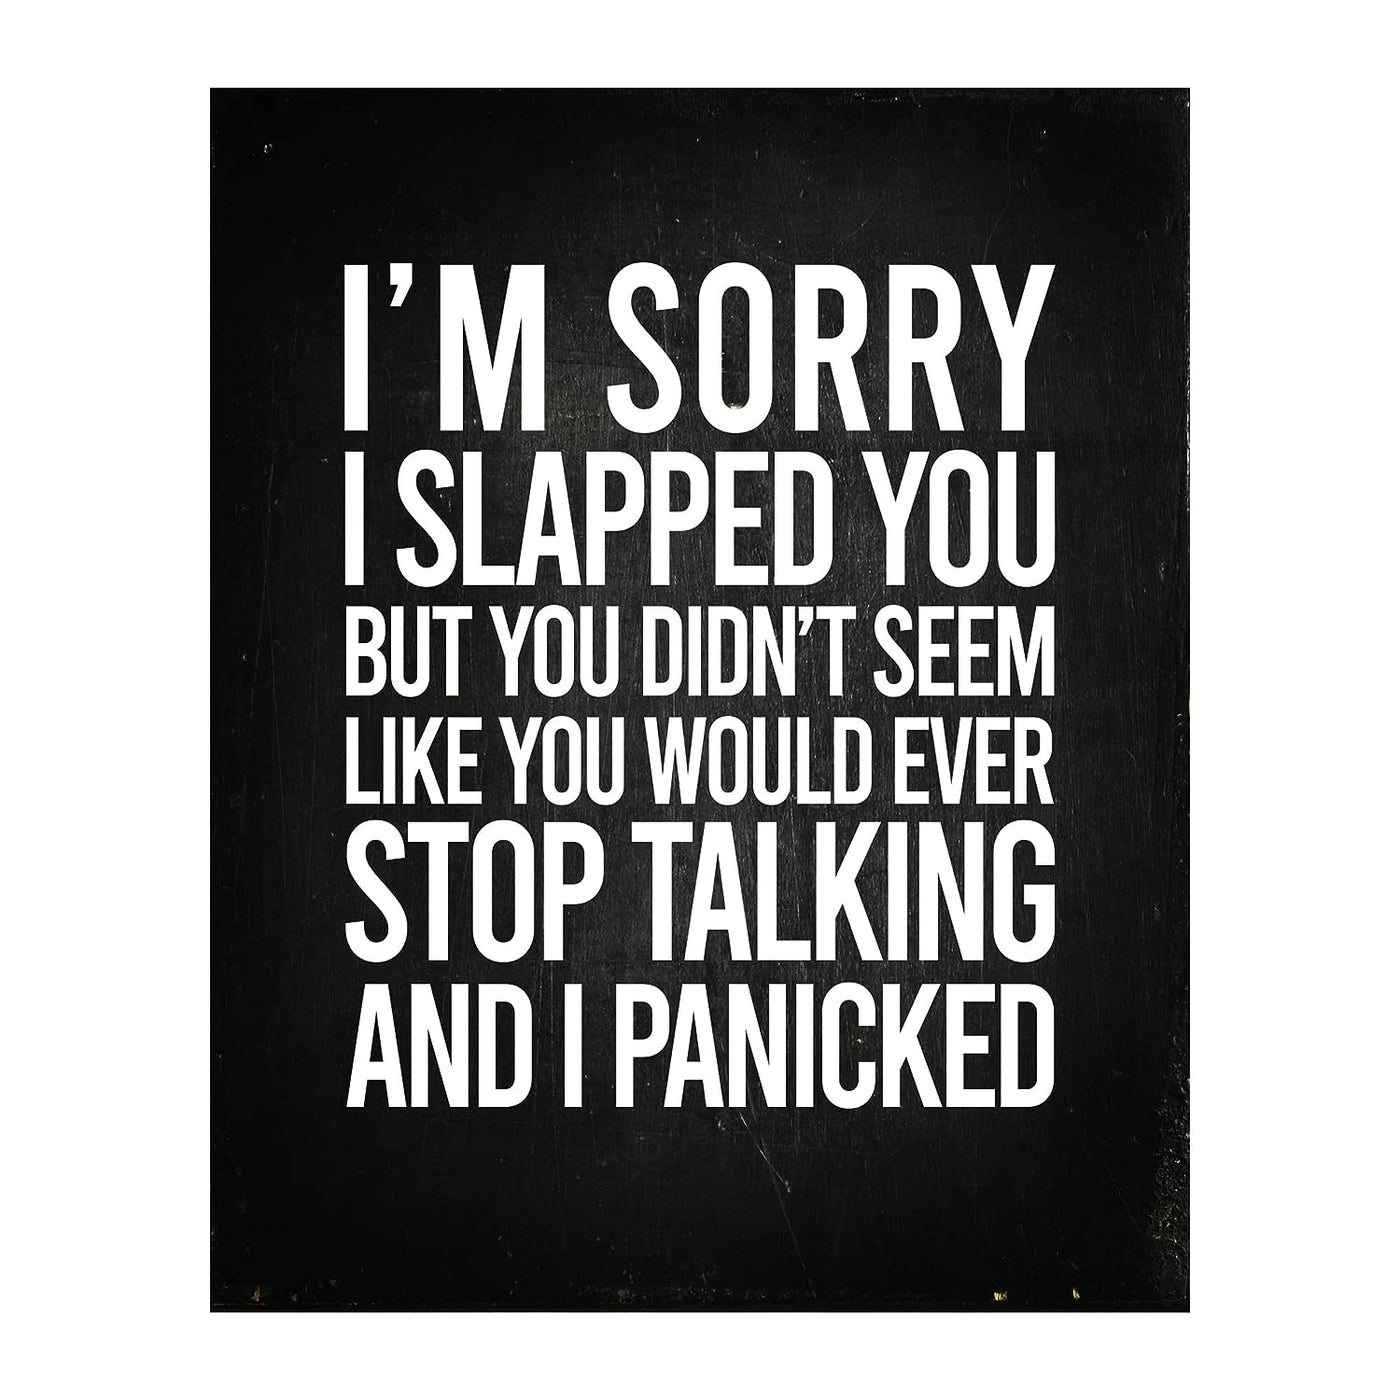 Sorry I Slapped You-Didn't Seem Like You'd Ever Stop Talking Funny Wall Sign -8 x 10" Sarcastic Art Print-Ready to Frame. Humorous Home-Office-Bar-Shop-Cave Decor. Great Desk Sign-Fun Novelty Gift!